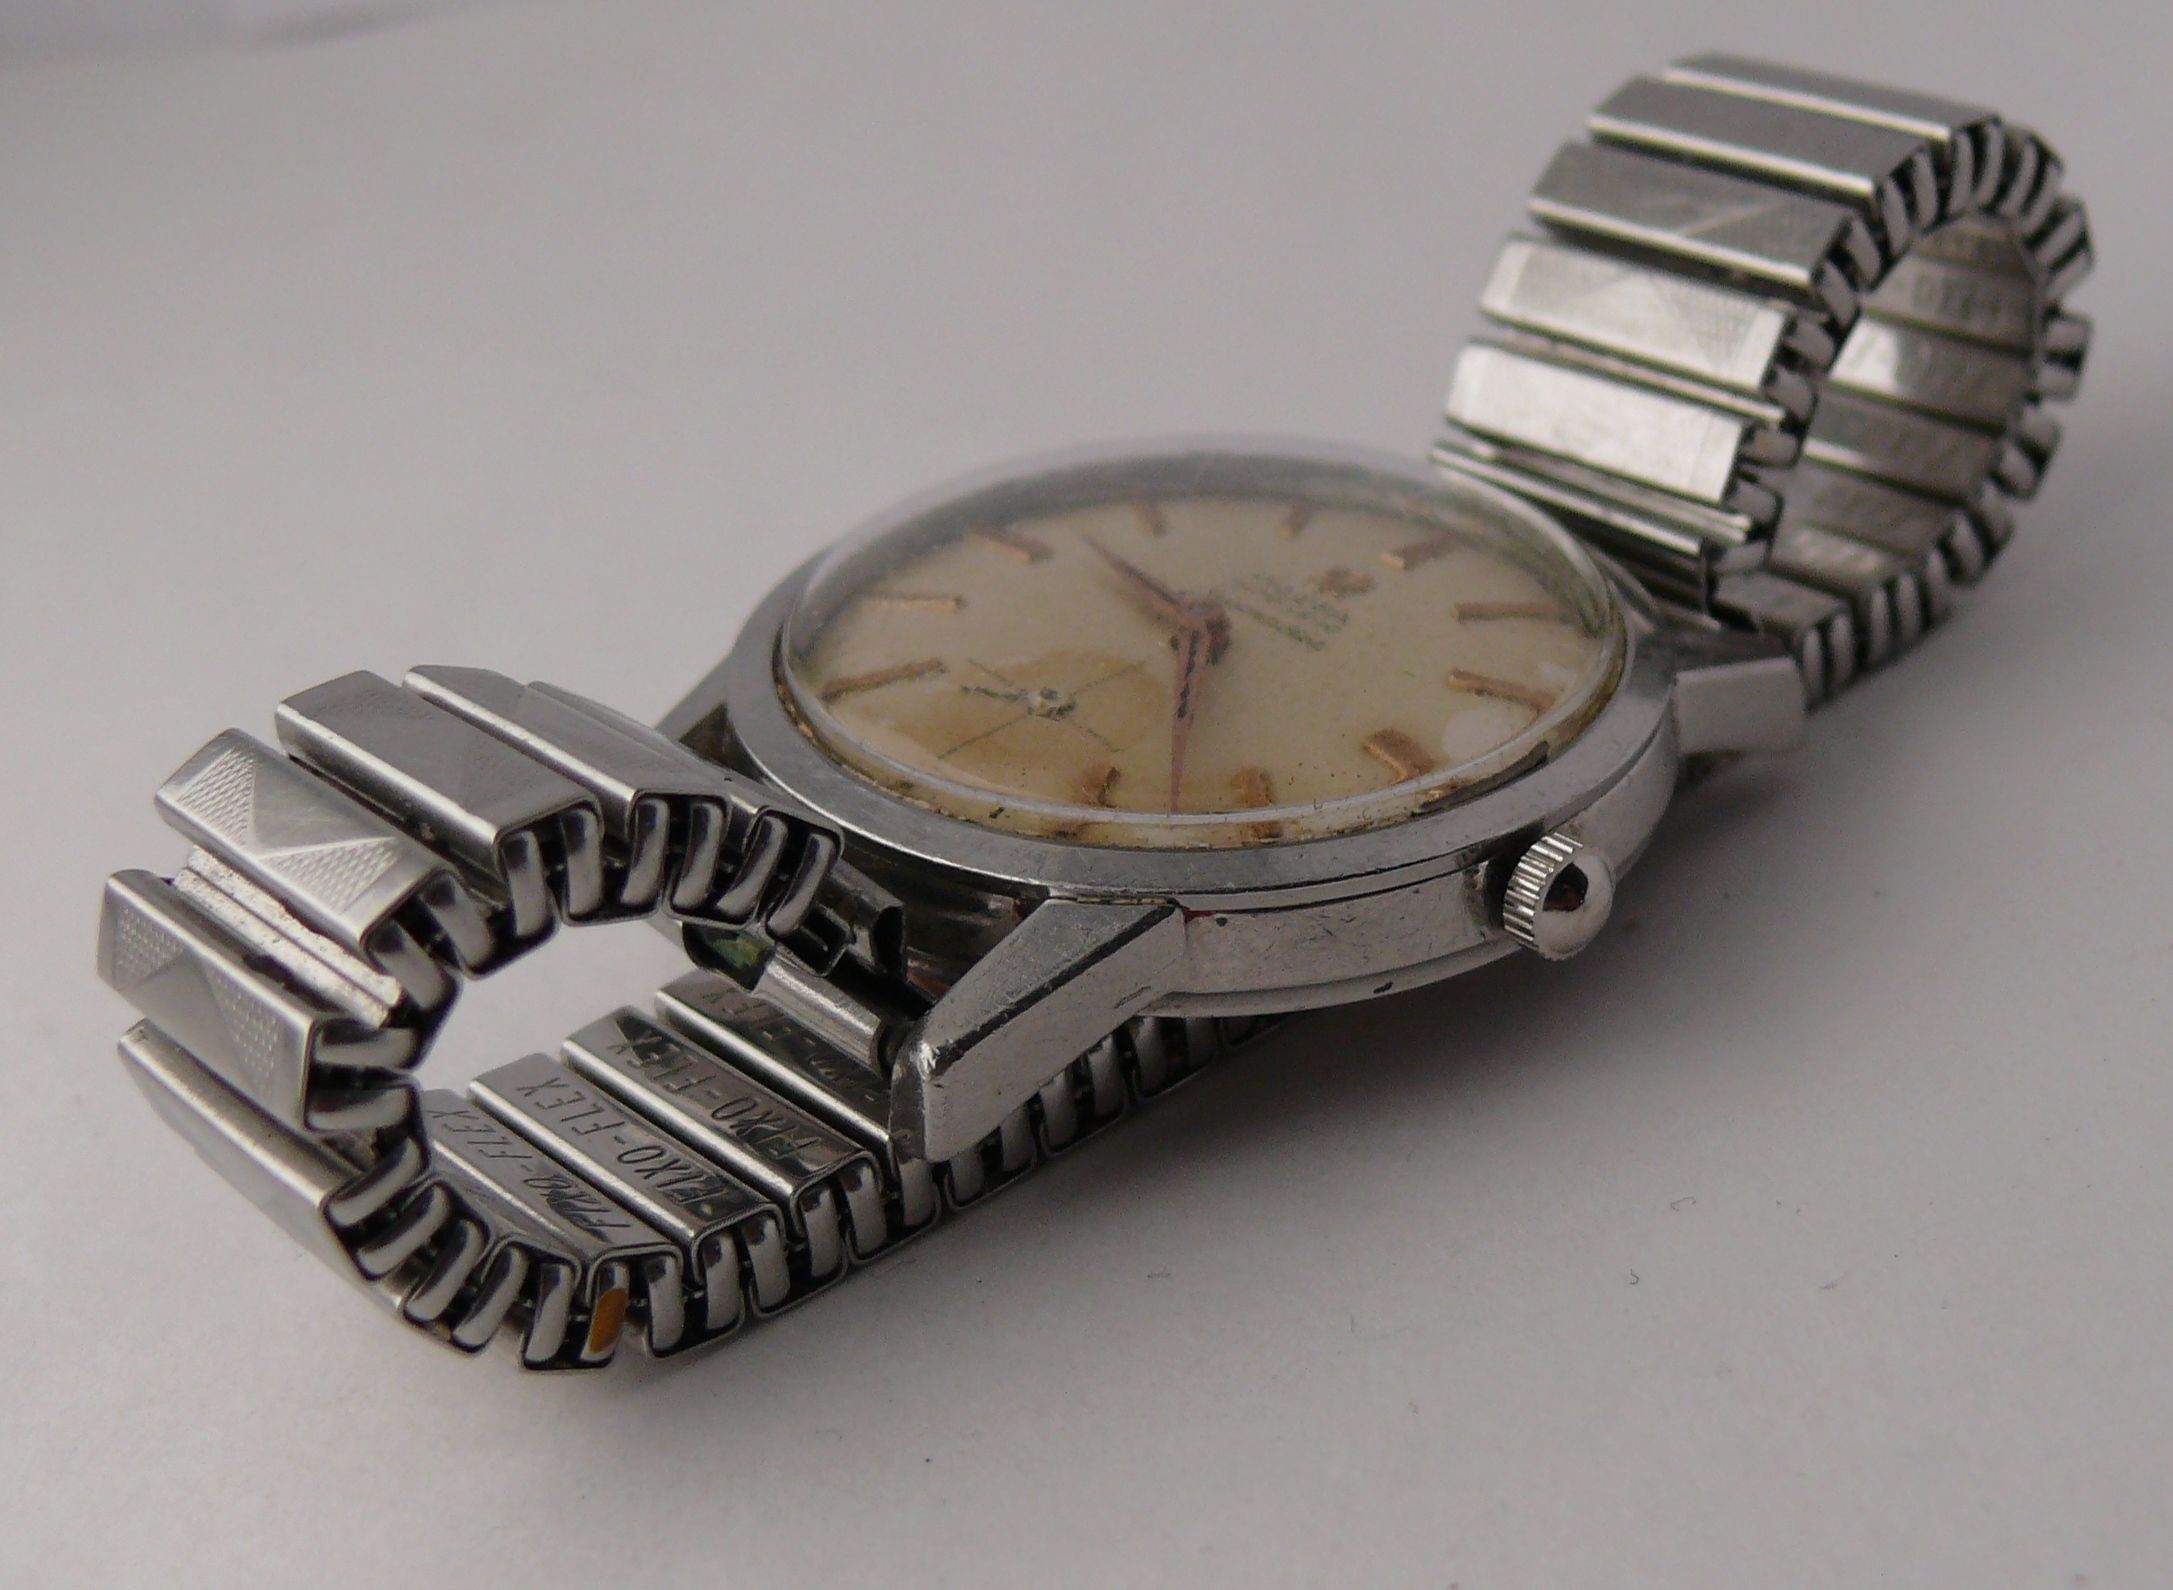 1961 Vintage Gents Omega Seamaster Automatic 14767 Wristwatch. Original dial and dagger hands show - Image 2 of 5